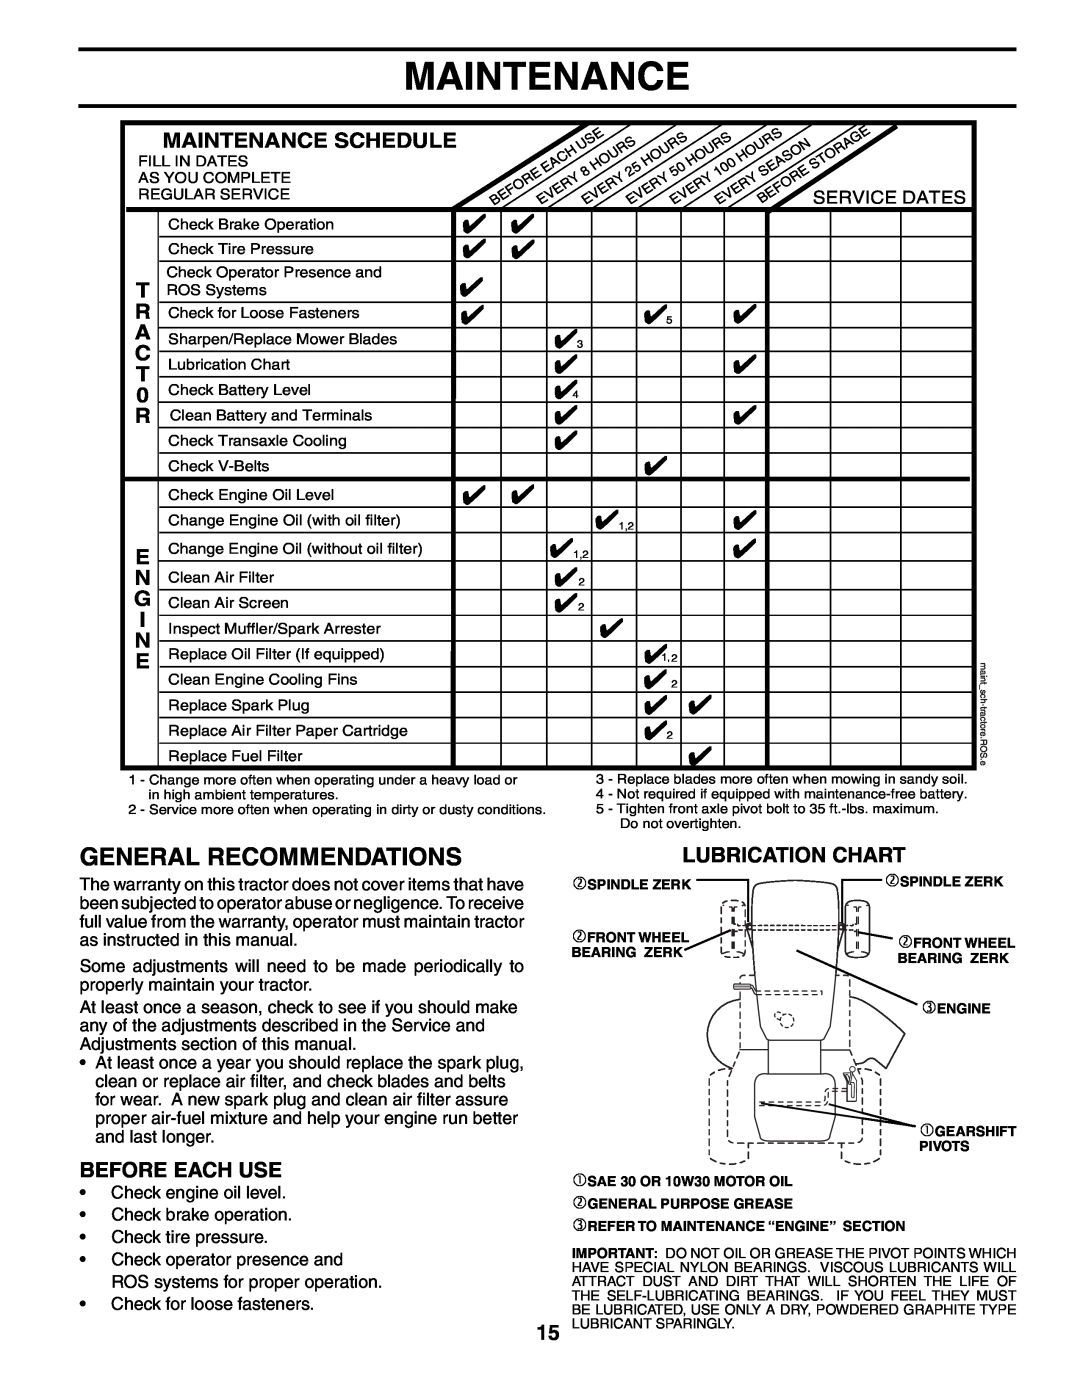 Weed Eater 195013, WE13538LT manual General Recommendations, Before Each Use, Lubrication Chart, Maintenance Schedule 